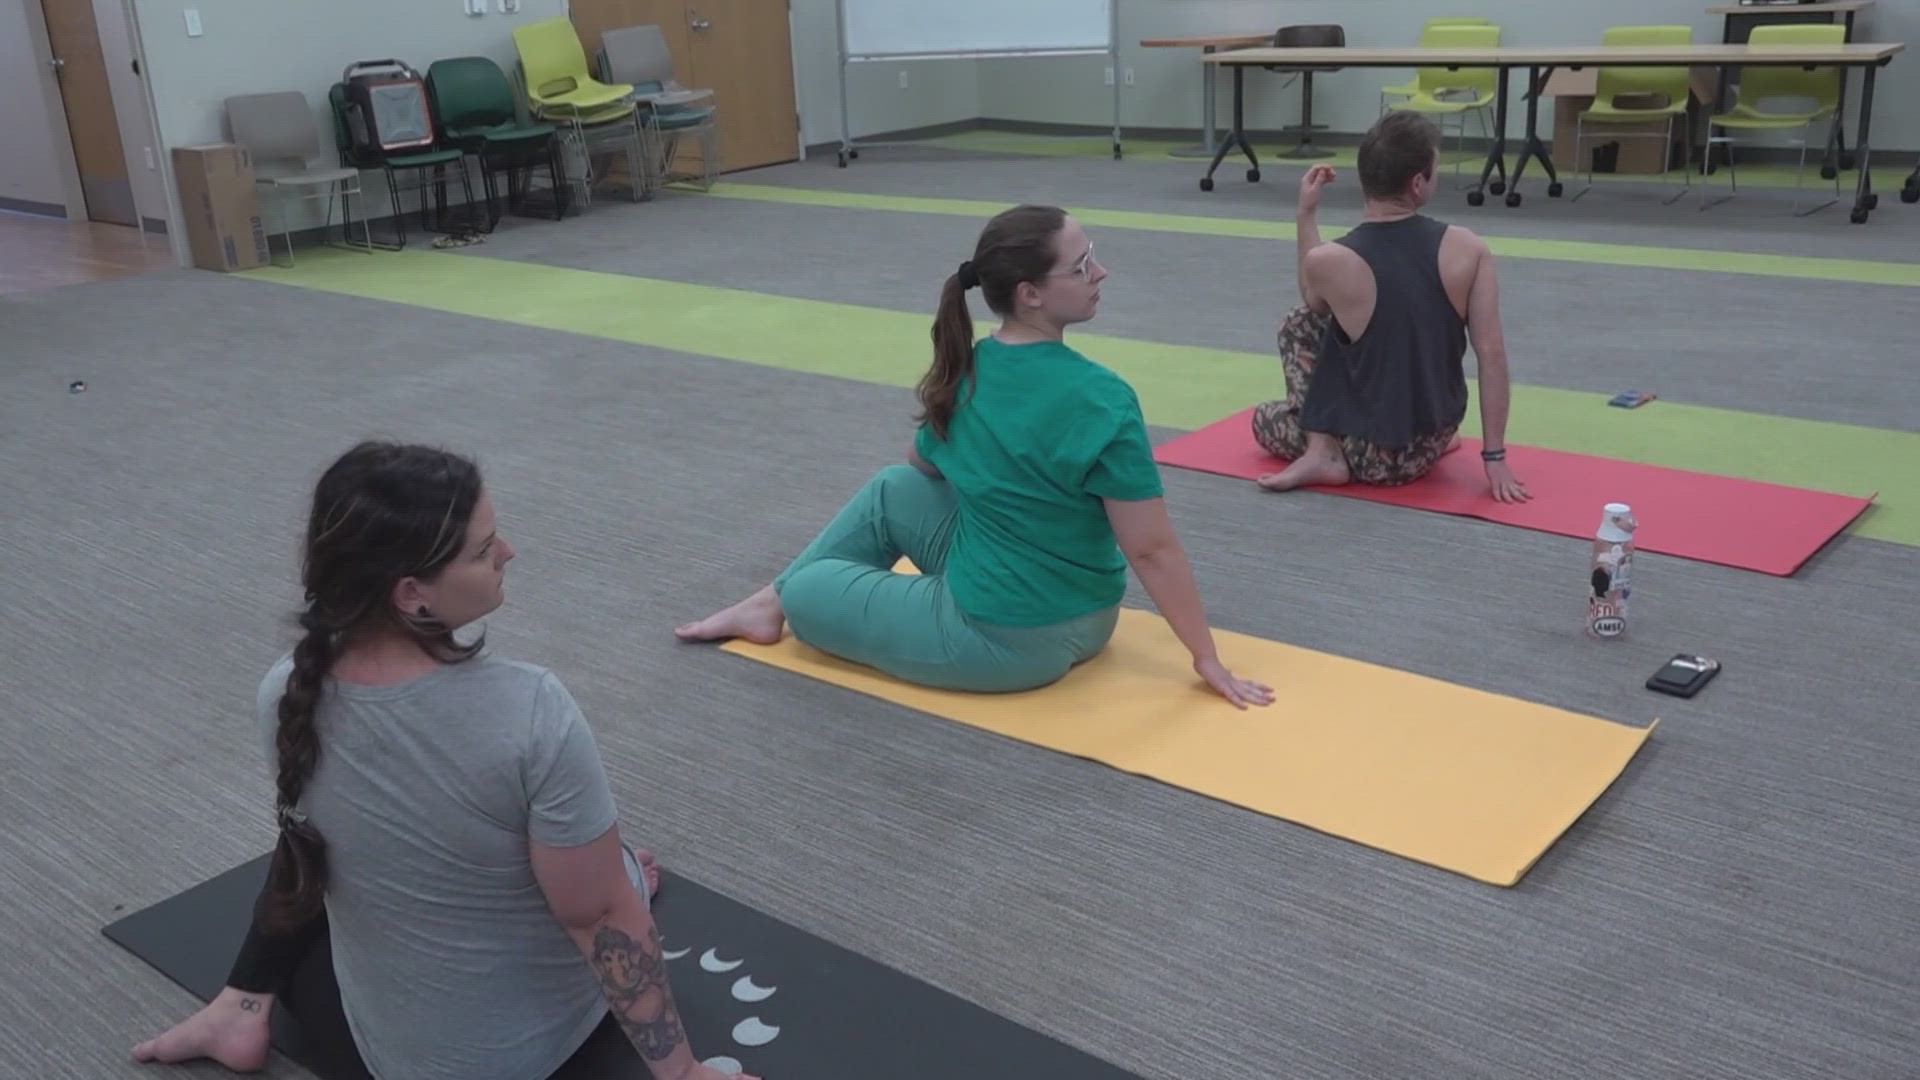 Zak Stinnett said he found recovery from alcohol abuse by doing yoga and now works to help others escape addiction.